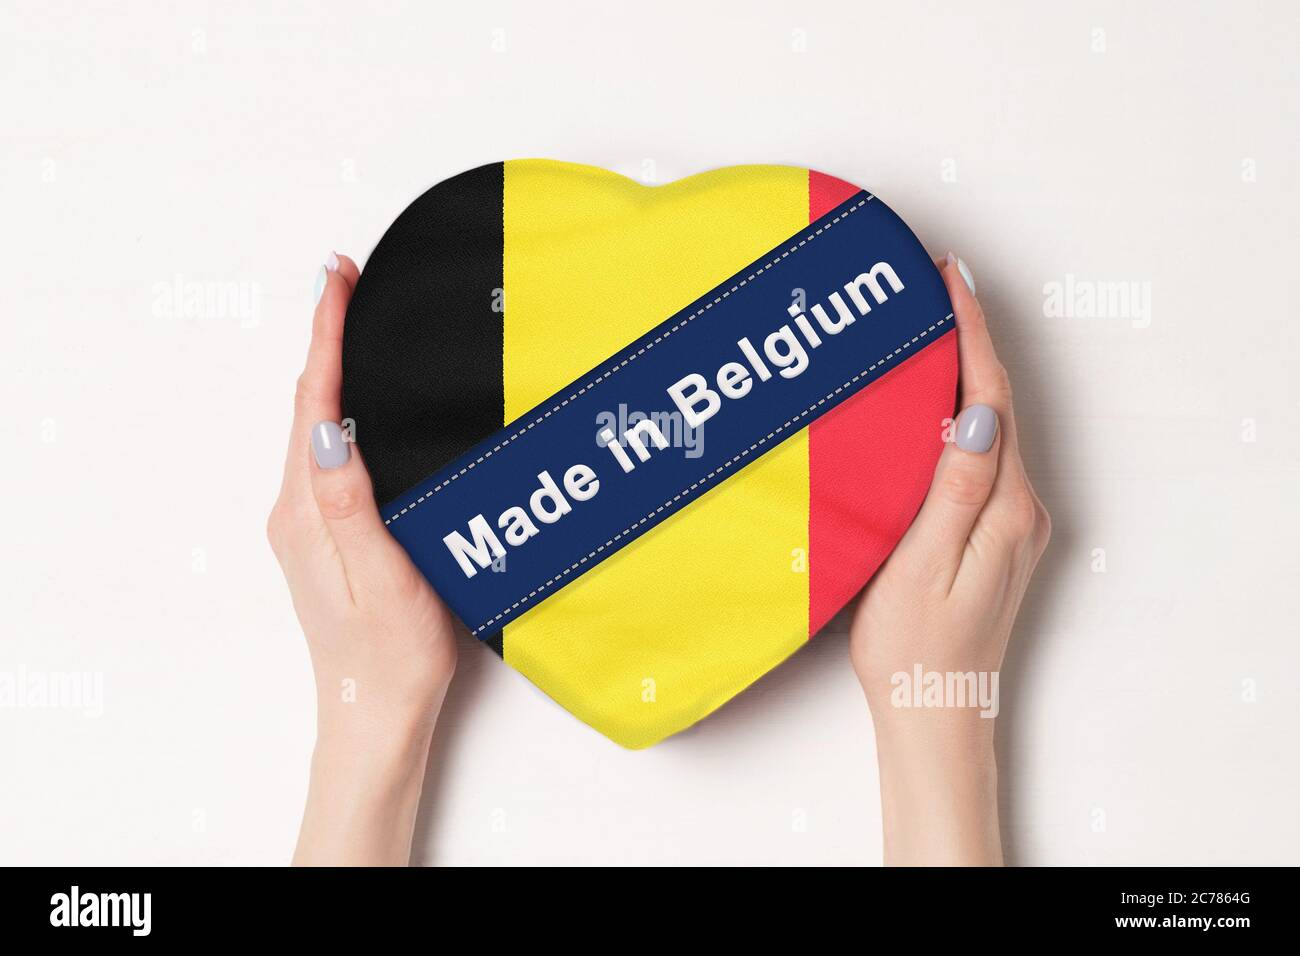 Inscription Made in Belgium, the flag of Belgium. Female hands holding a heart shaped box. White background. Stock Photo